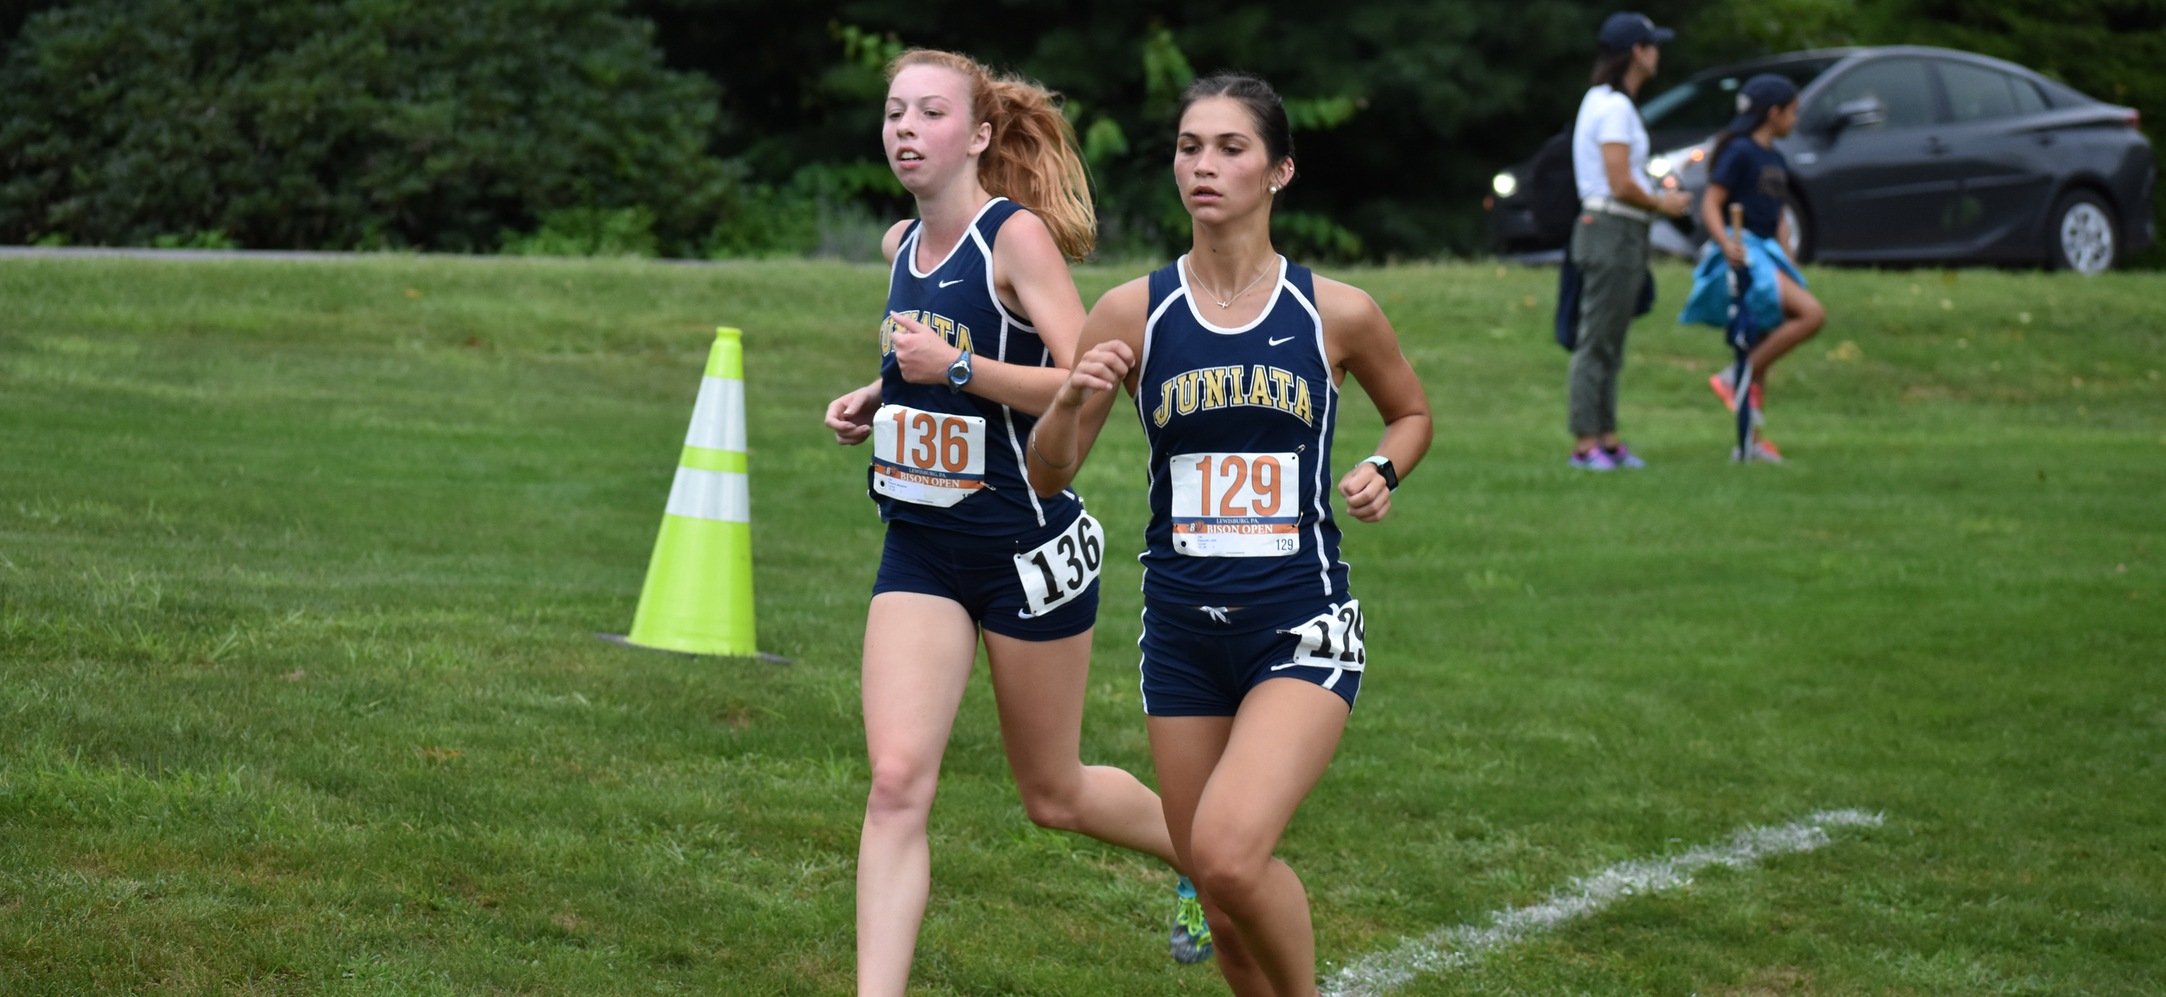 Meaghen Stewart finished 36th while Julia Freimuth finished 40th. 